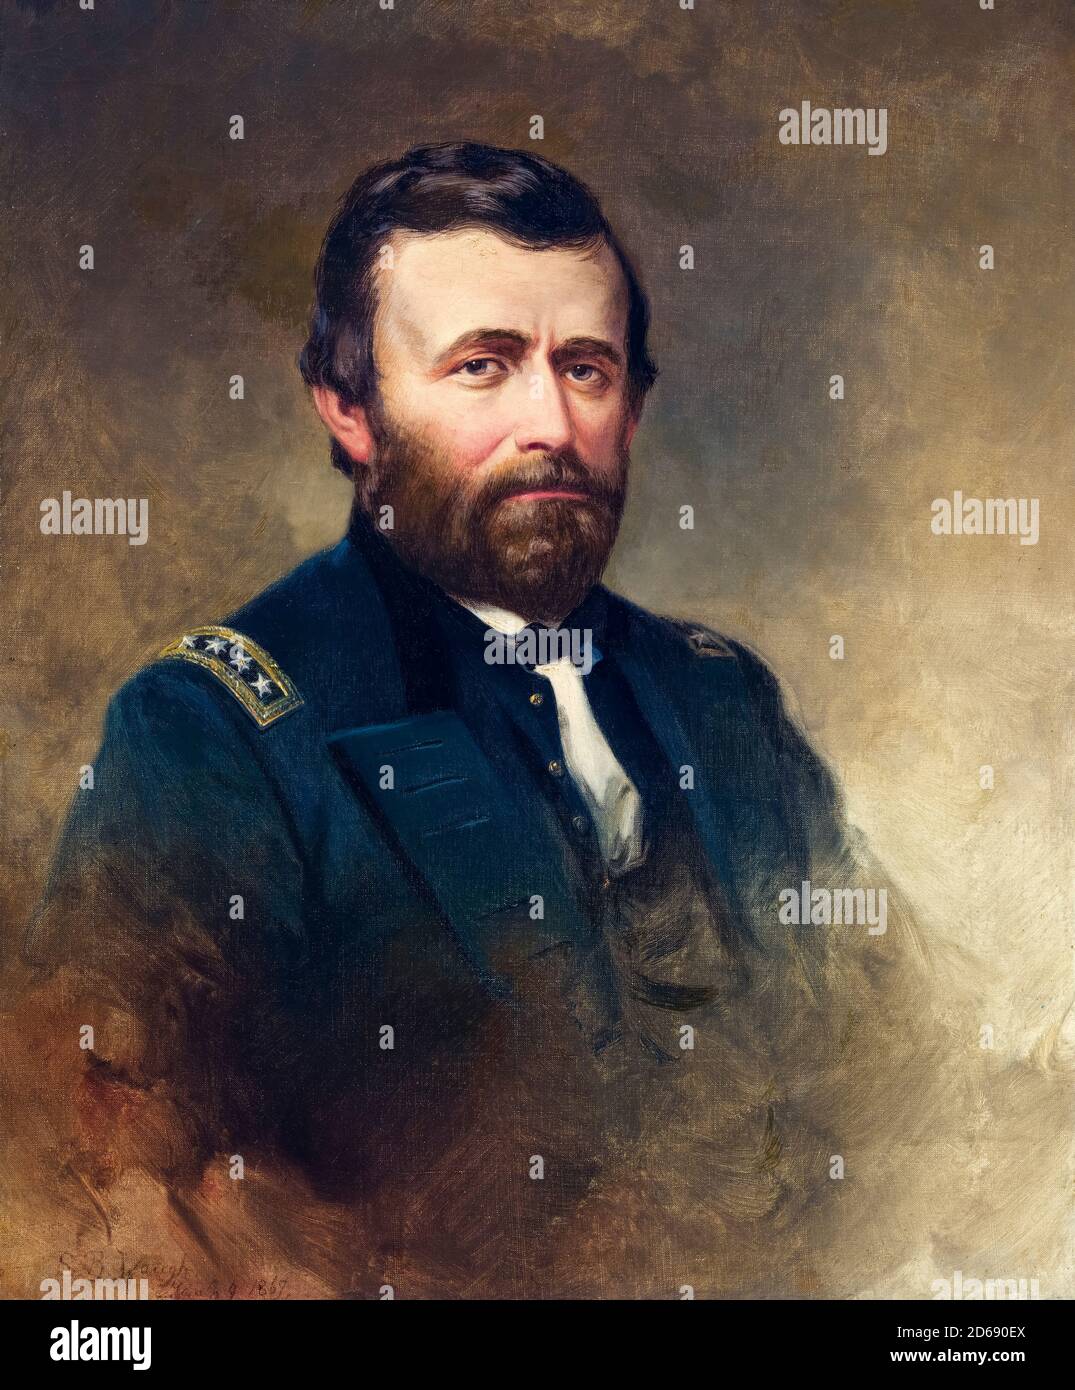 Ulysses S Grant (1822-1885), American soldier and politician who served as the 18th President of the United States, portrait painting in military uniform by Samuel Bell Waugh, 1869 Stock Photo